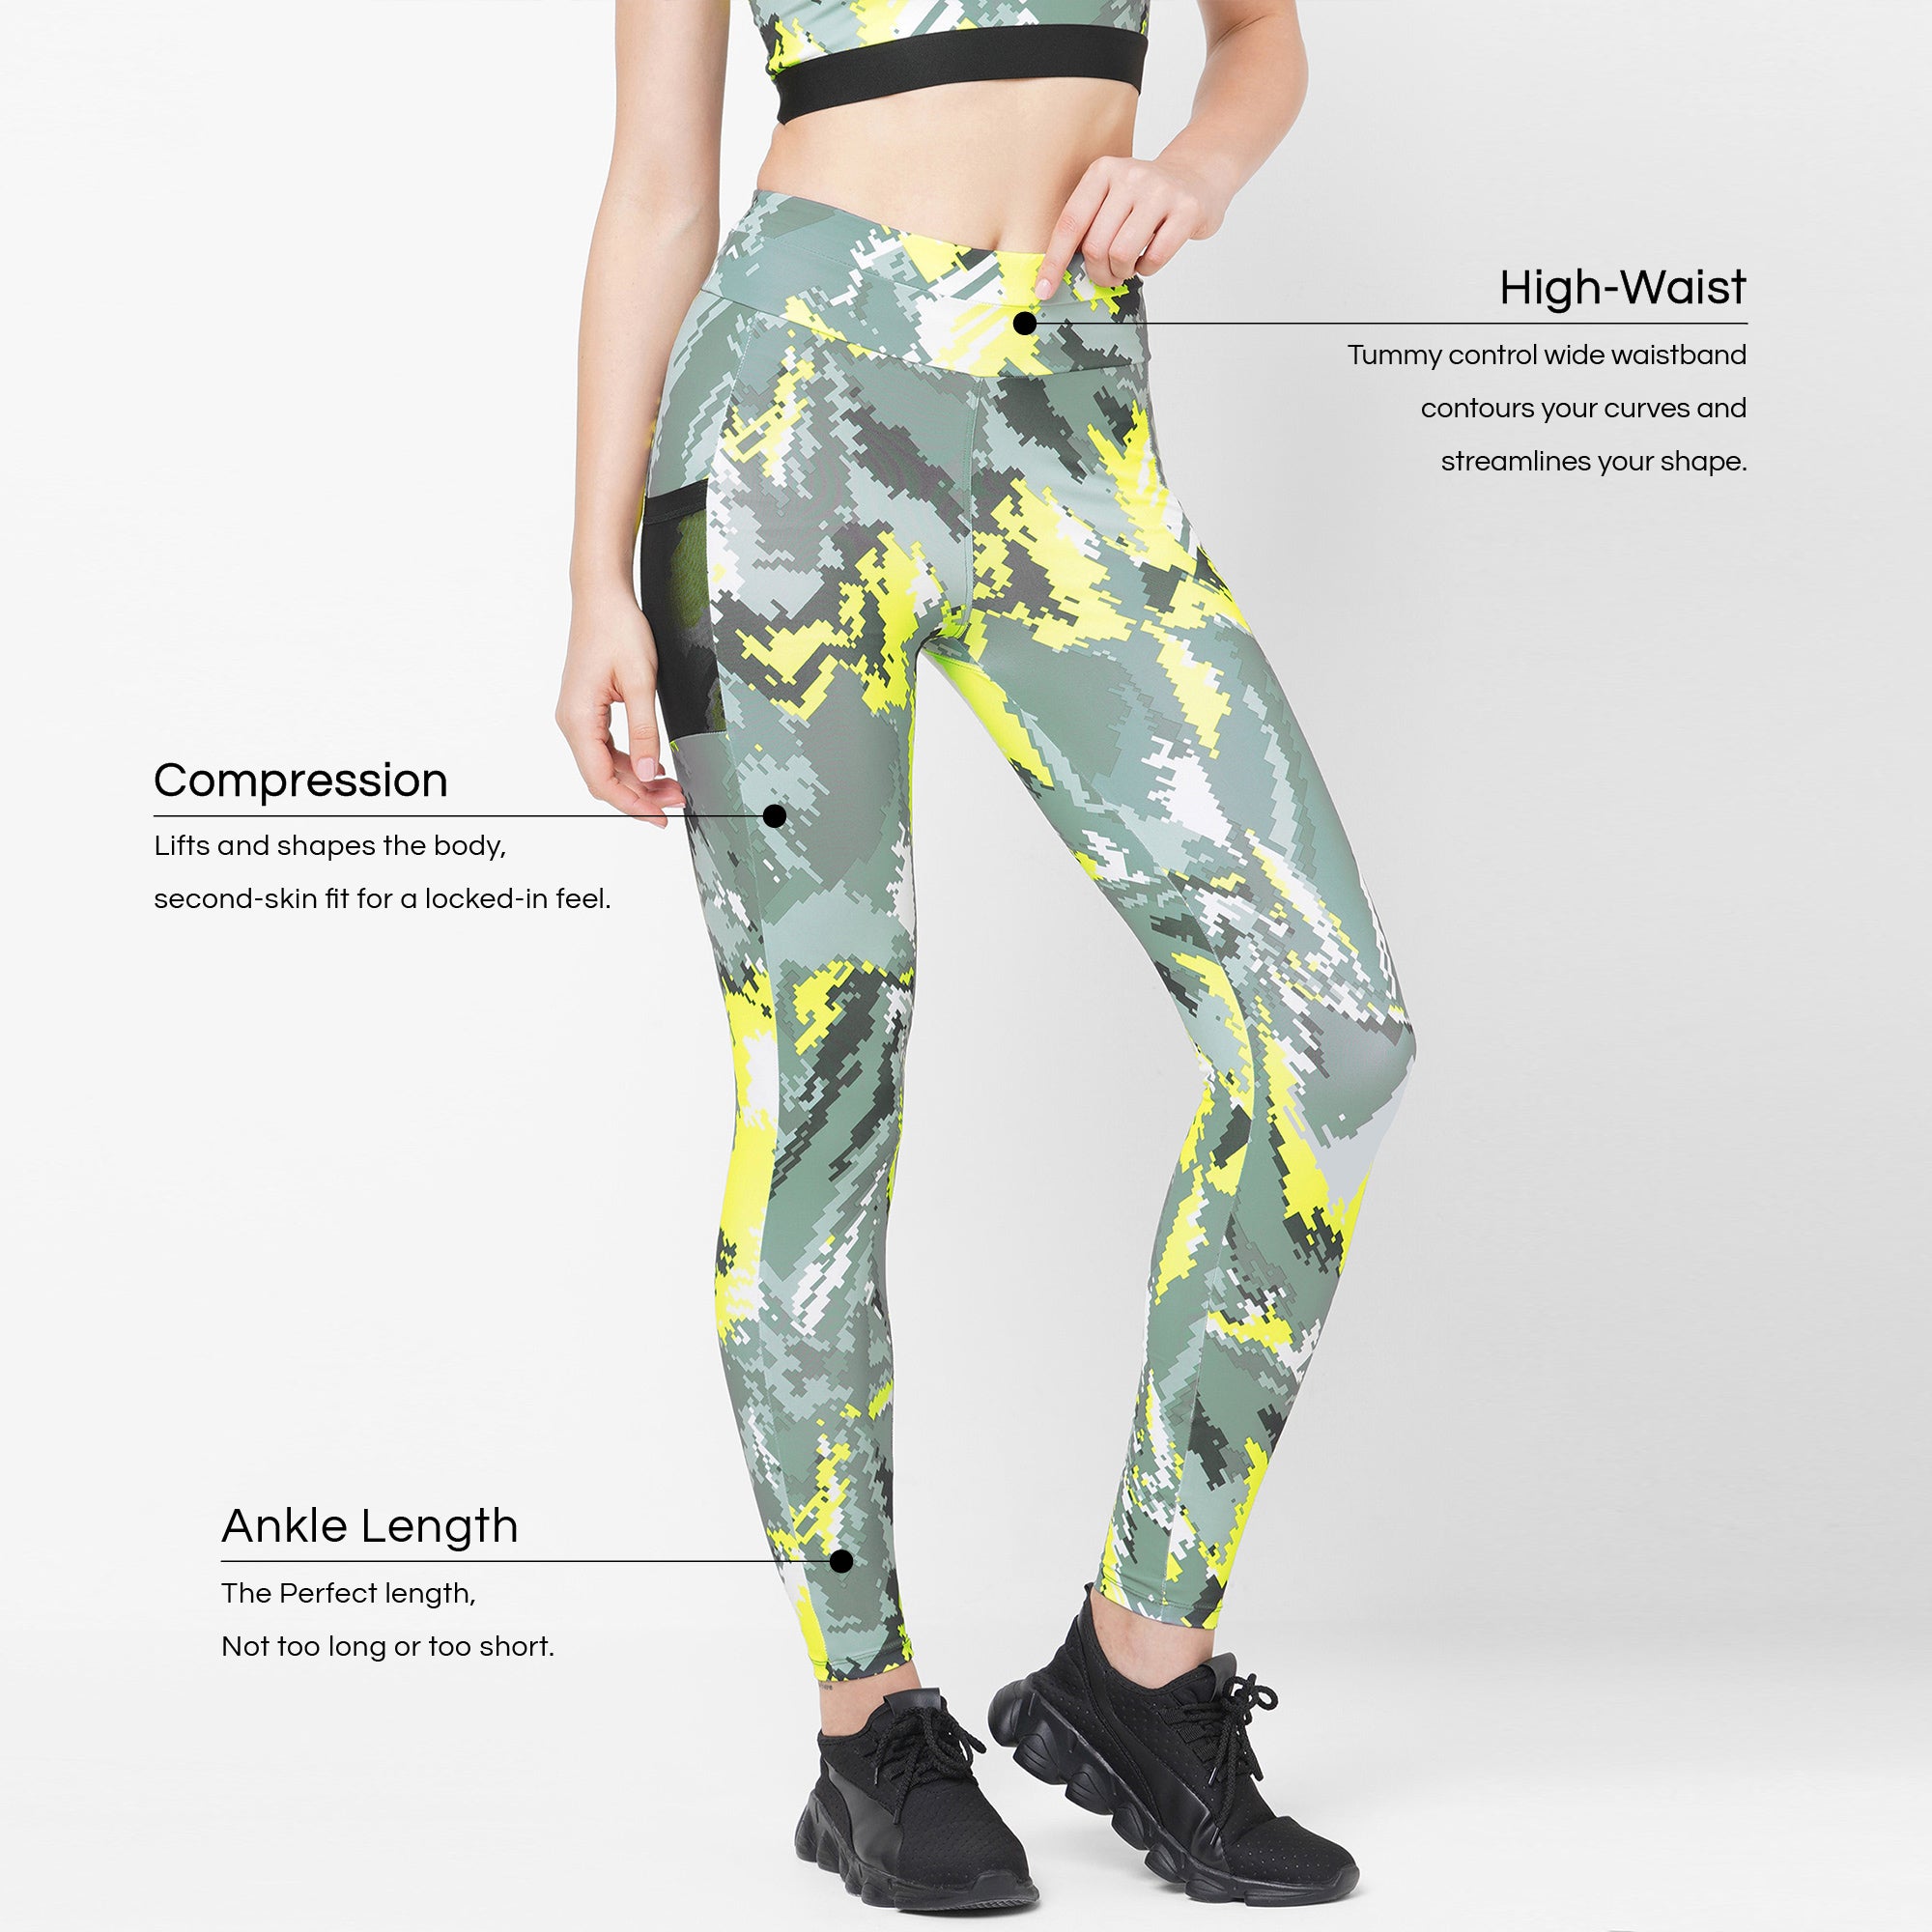 Camo Leggings | Forest Green Camouflage Activewear Yoga Pants